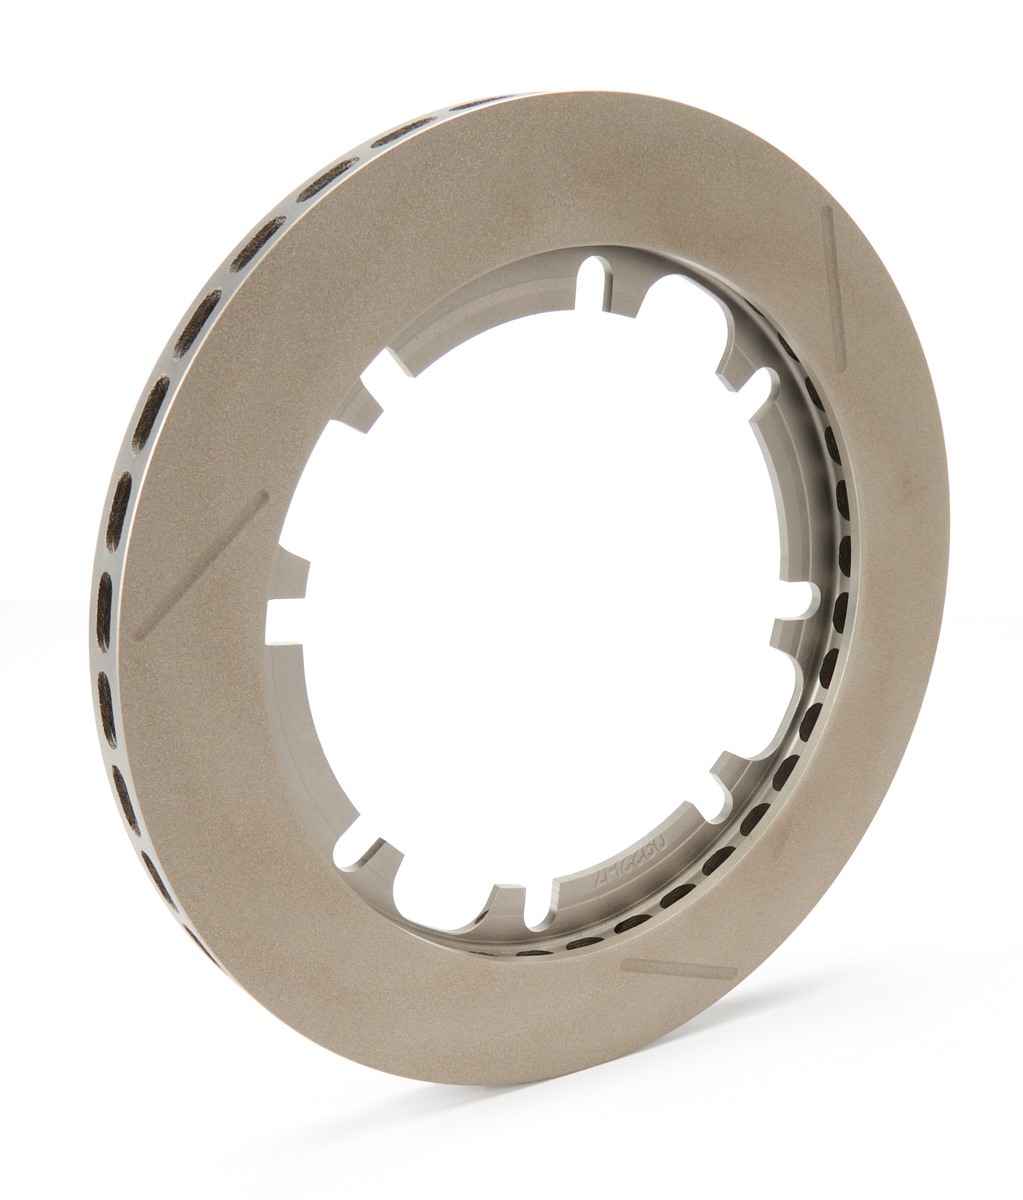 MPD Racing 17925 Brake Rotor, Front, 11.75 in OD, 0.810 in Thick, 8 x 7.000 in Bolt Pattern, Titanium, Gray Ceramic, Each